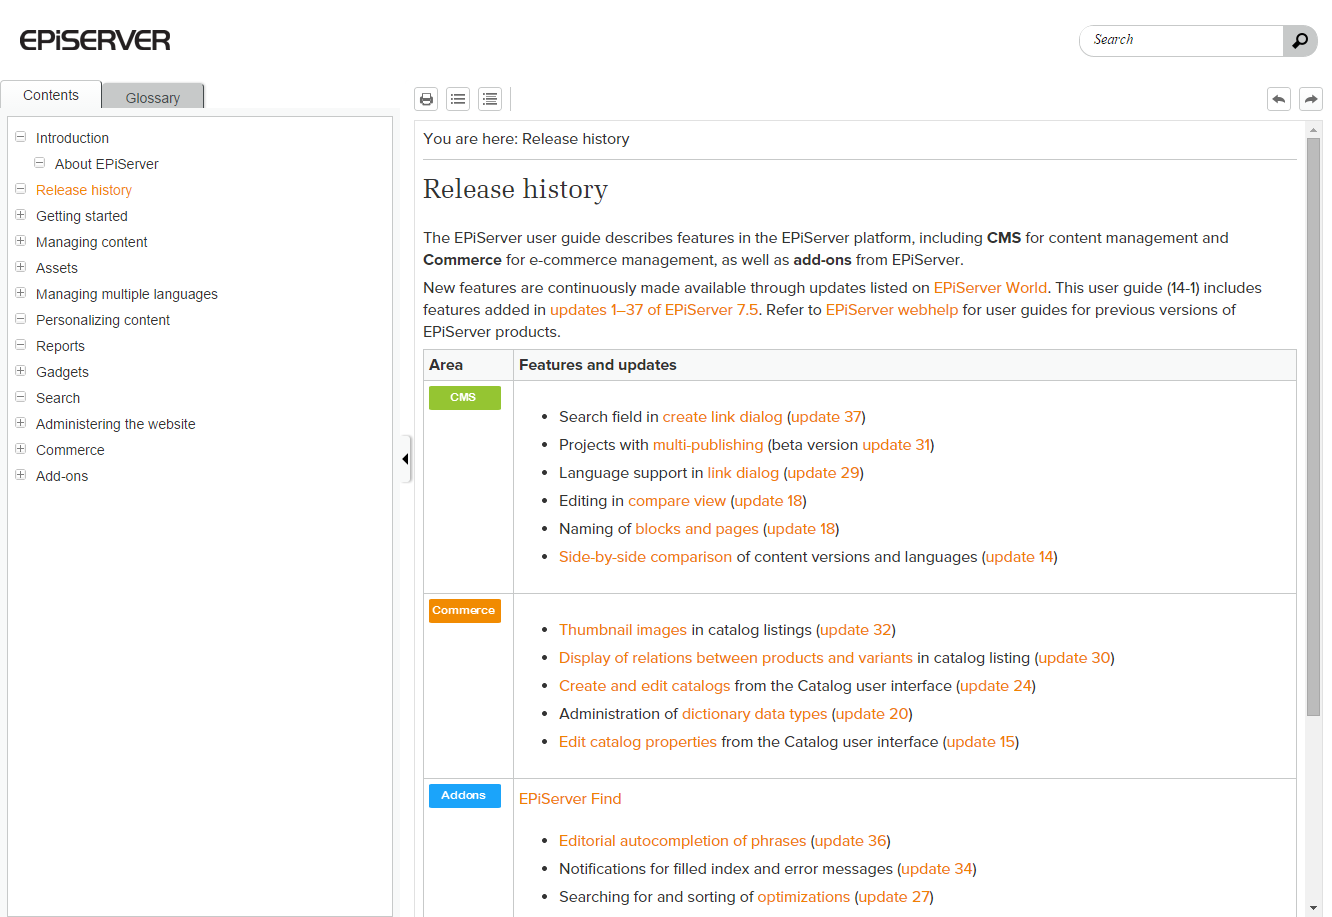 Image showing the version history of features described in EPiServer User Guide.